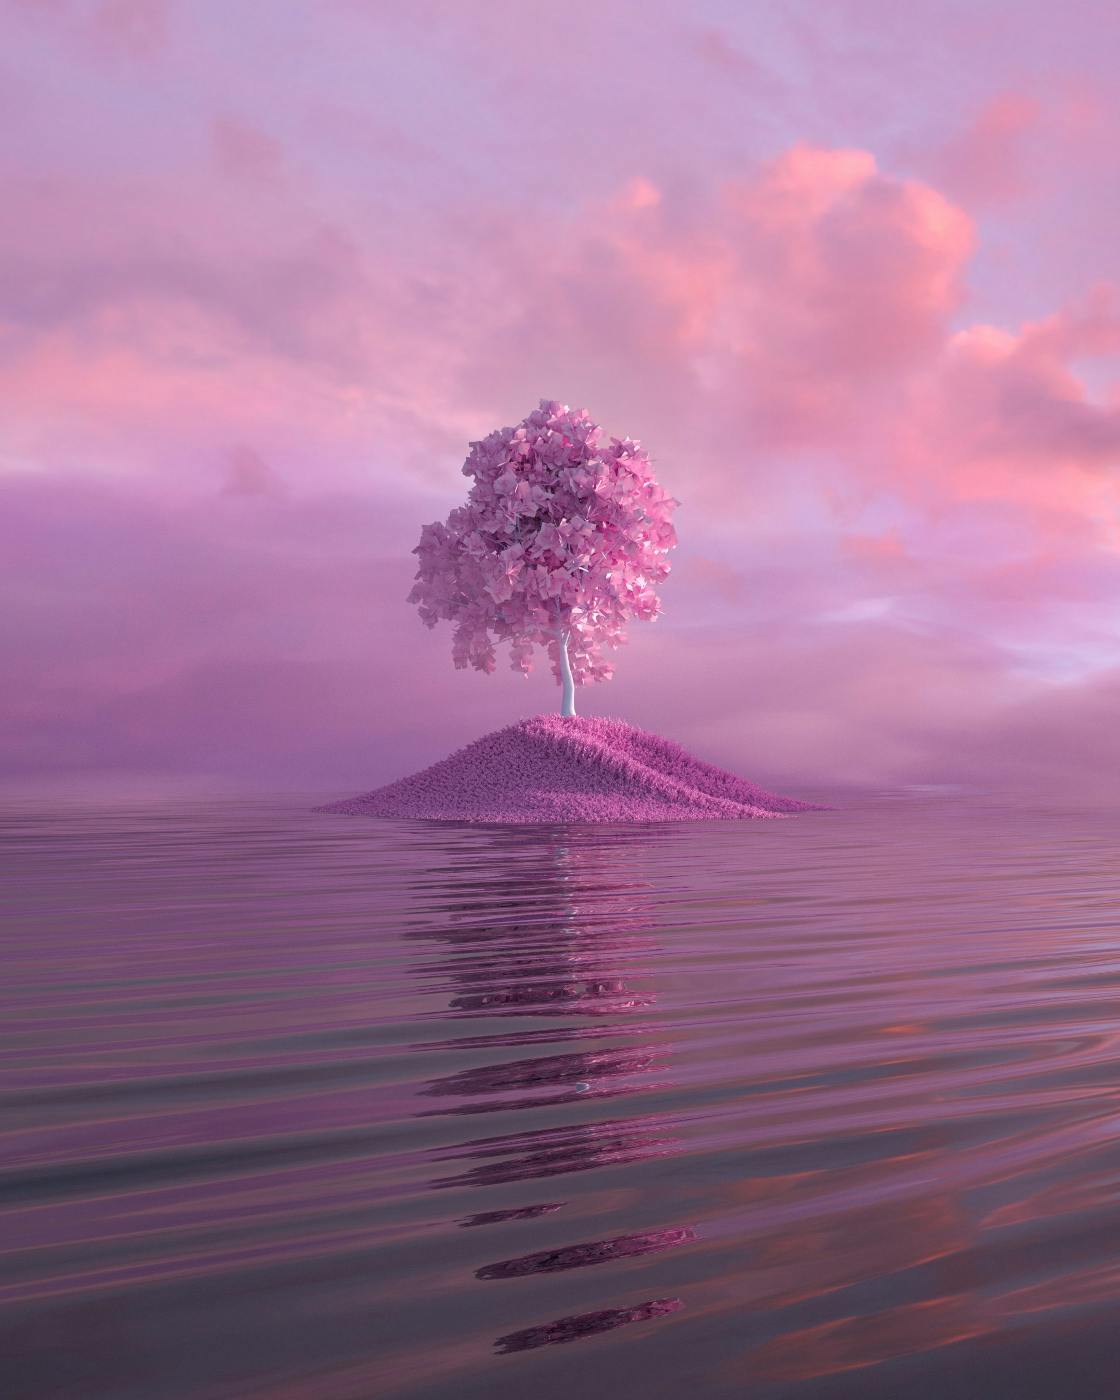 A tree on an island in hues of purple